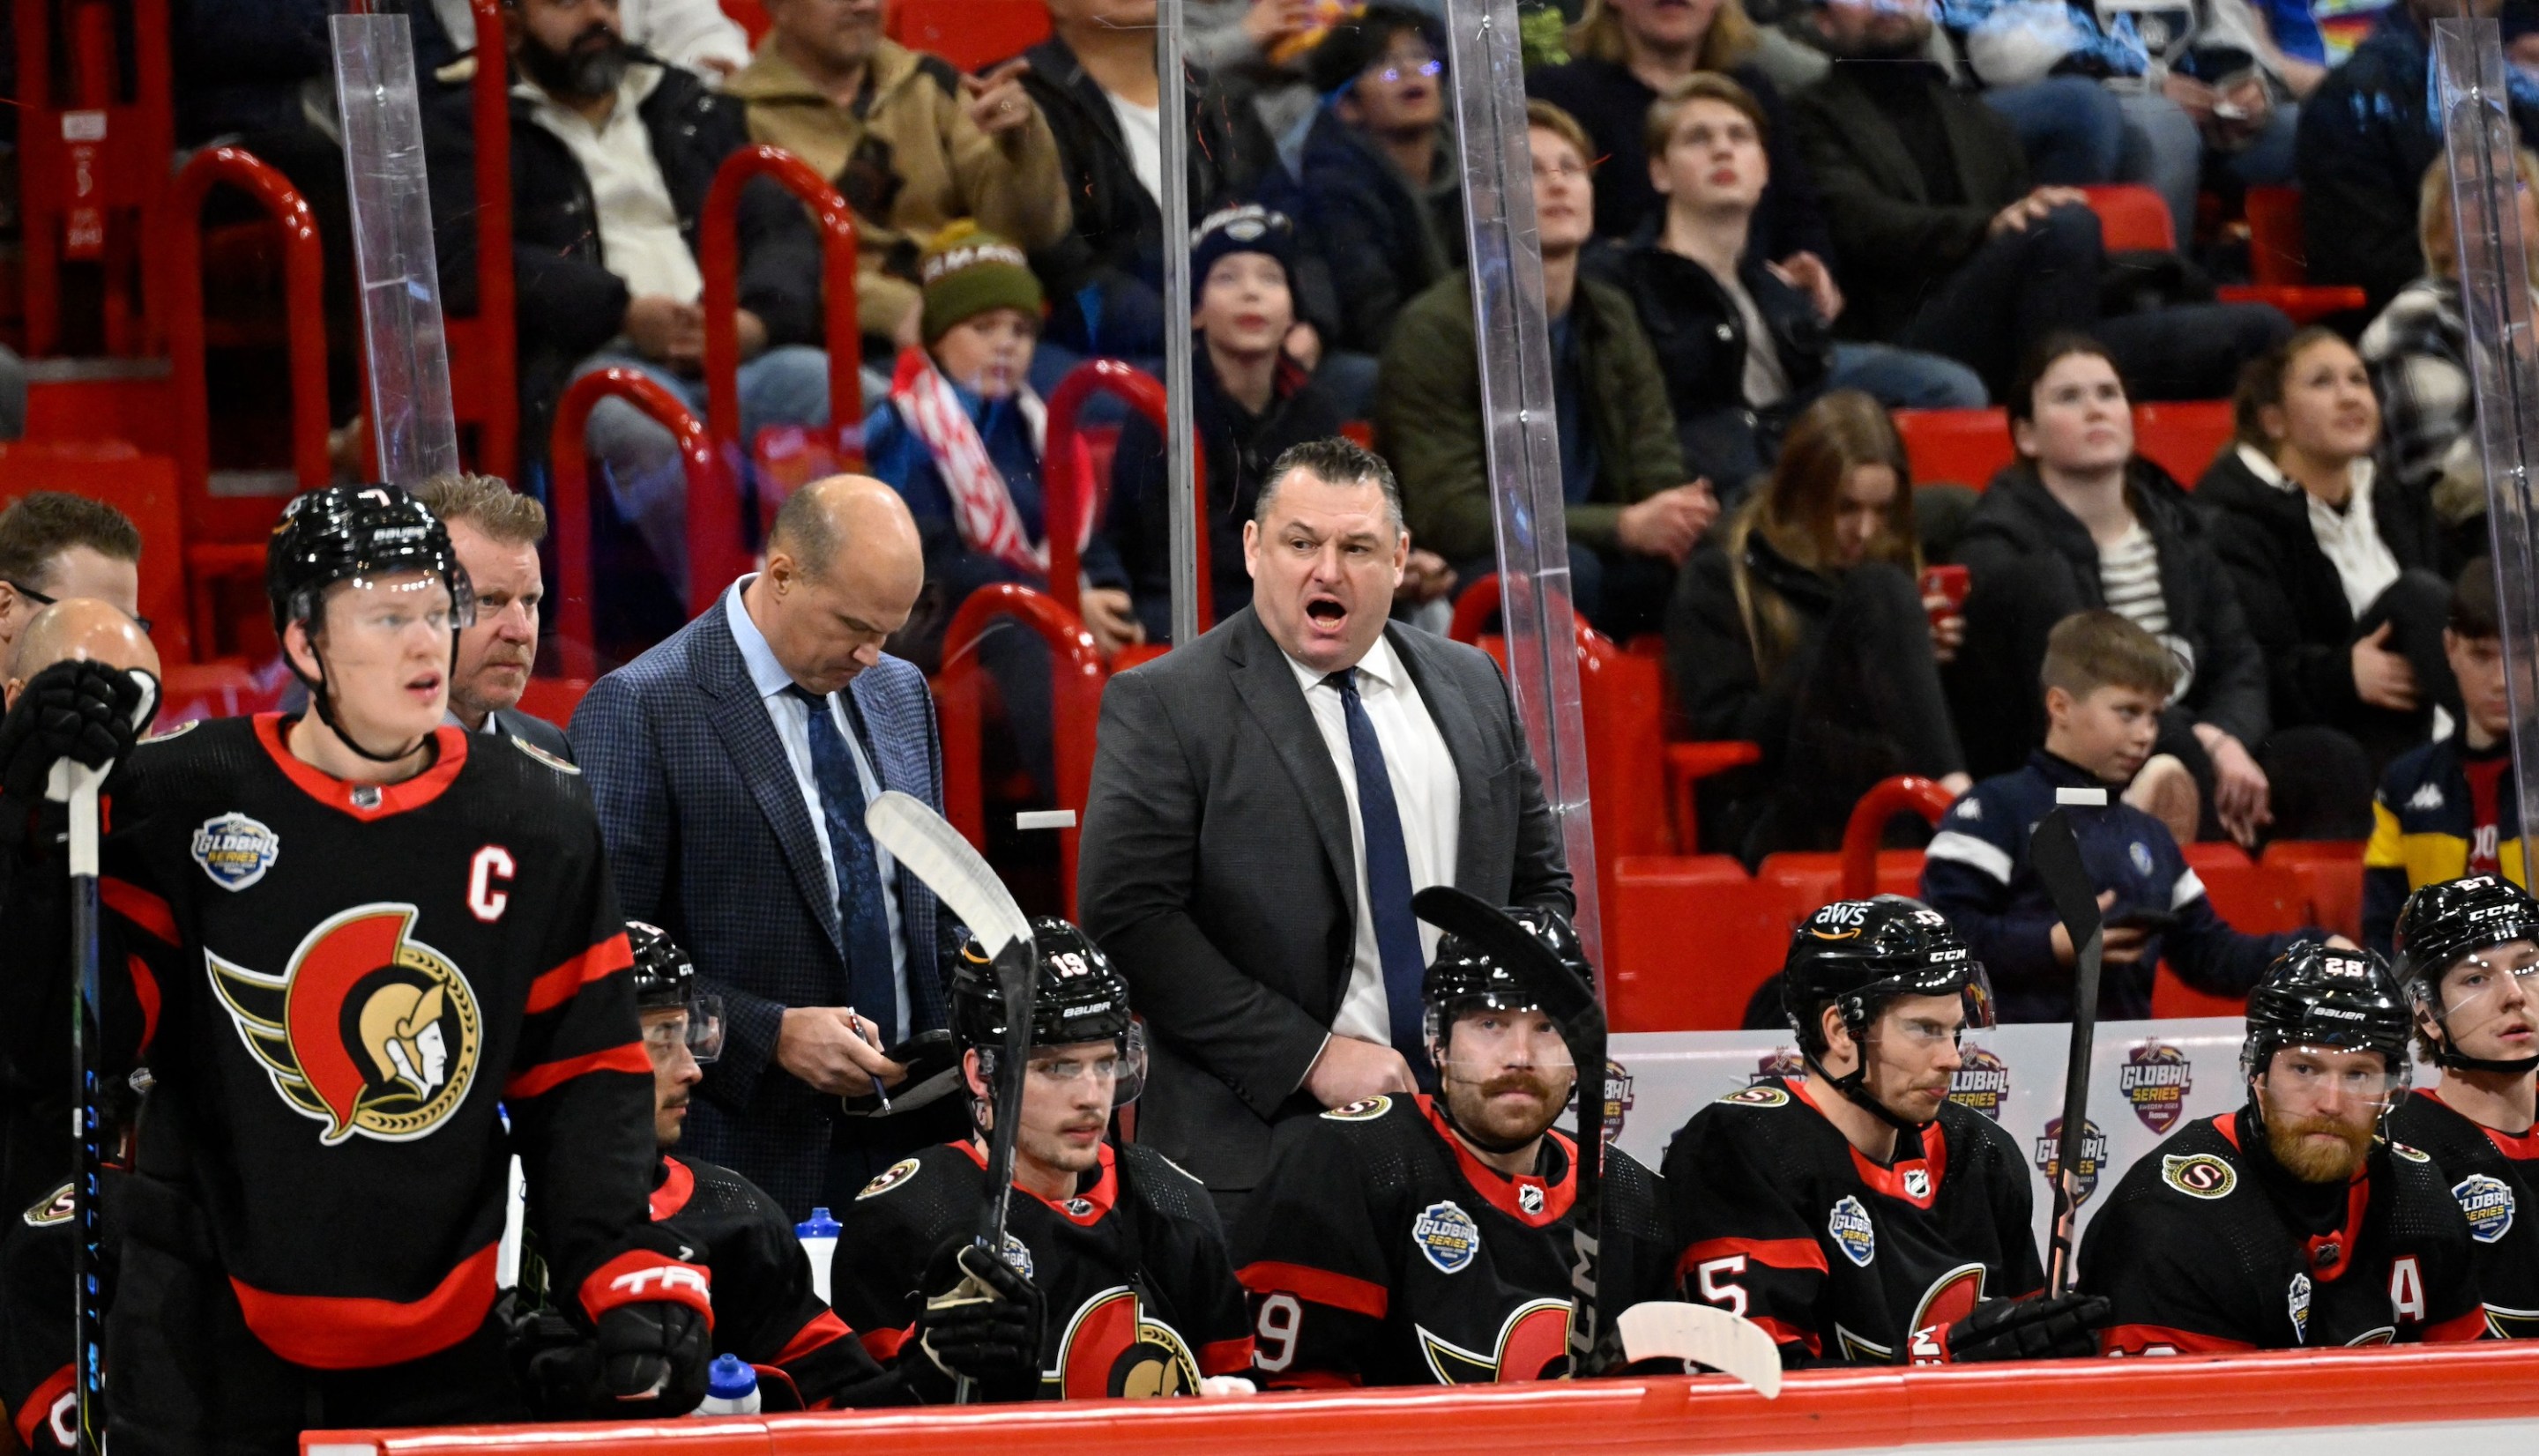 Ottawa Senators head coach D.J. Smith (back R) reacts during the NHL Global Series Ice Hockey match between Detroit Red Wings and Ottawa Senators in Stockholm on November 16, 2023. (Photo by Henrik MONTGOMERY / TT NEWS AGENCY / AFP) / Sweden OUT (Photo by HENRIK MONTGOMERY/TT NEWS AGENCY/AFP via Getty Images)